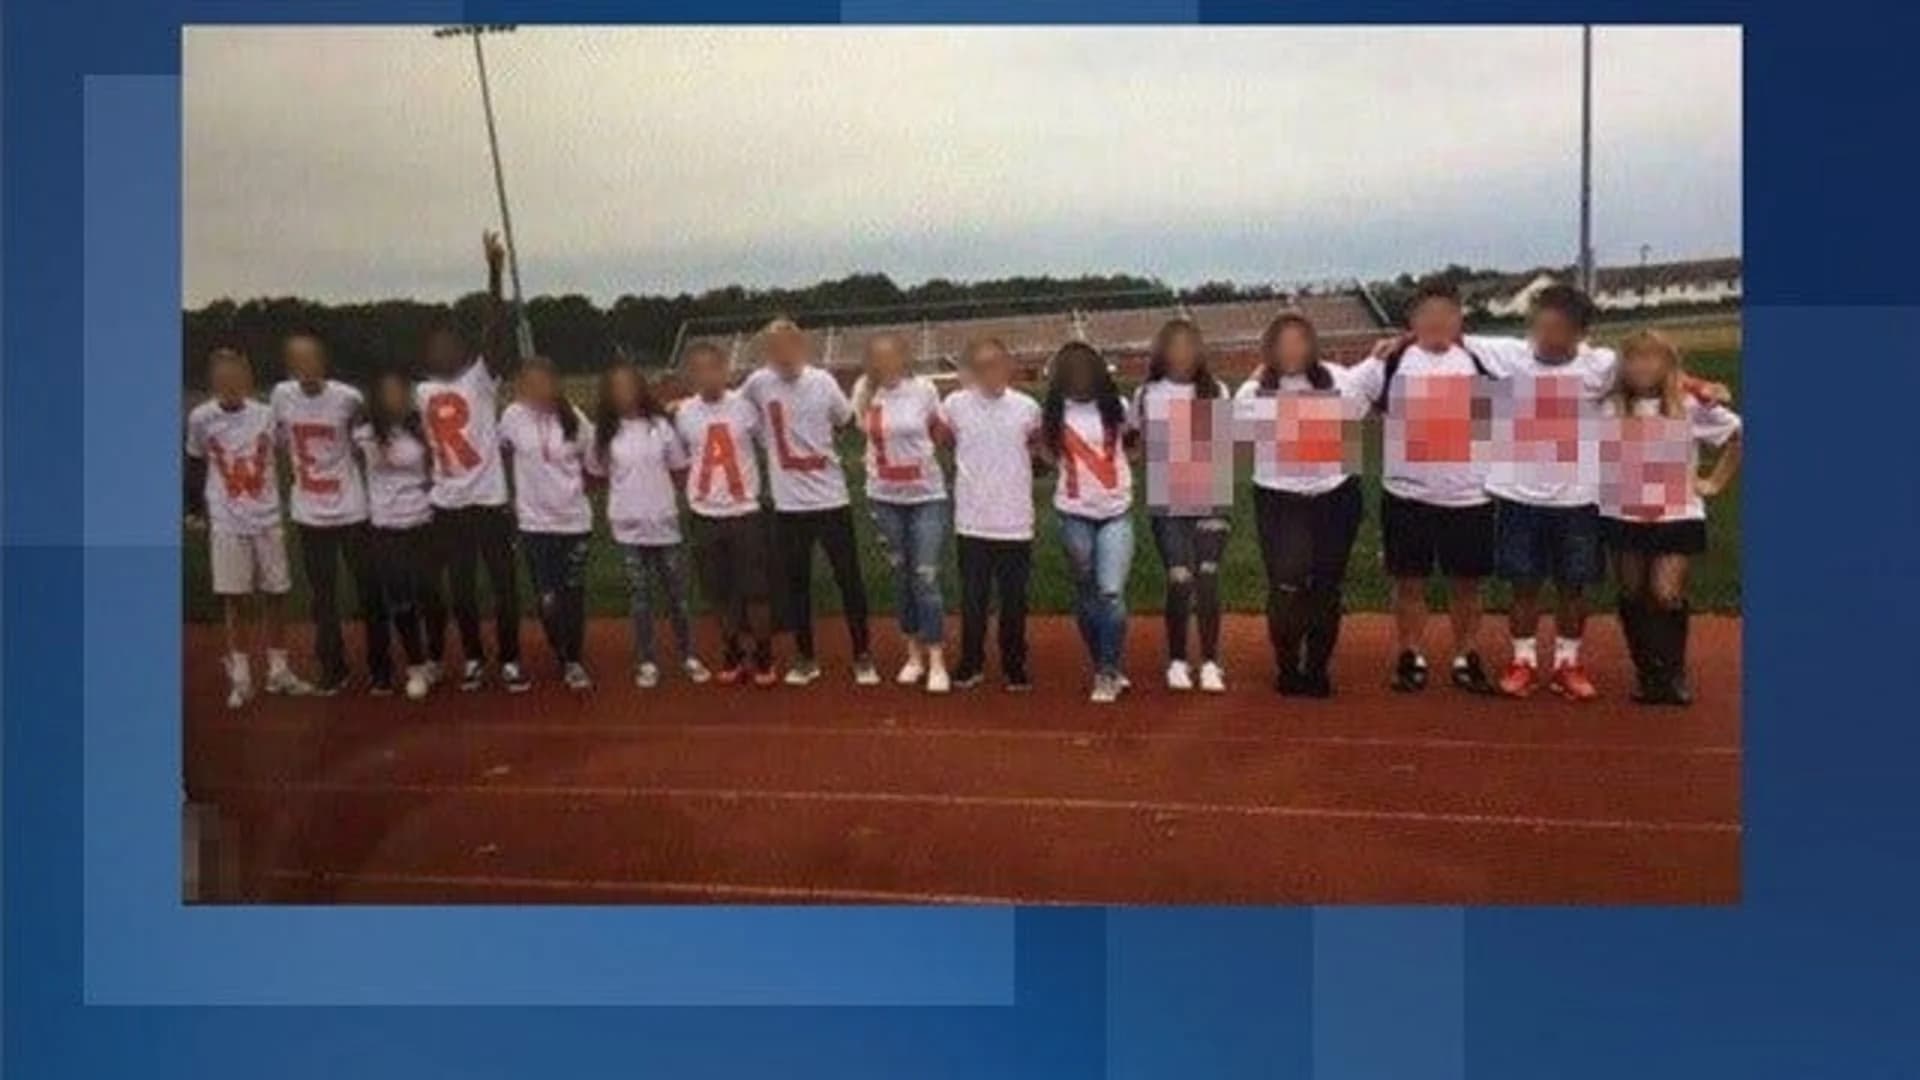 High school students protest classmates’ controversial photo